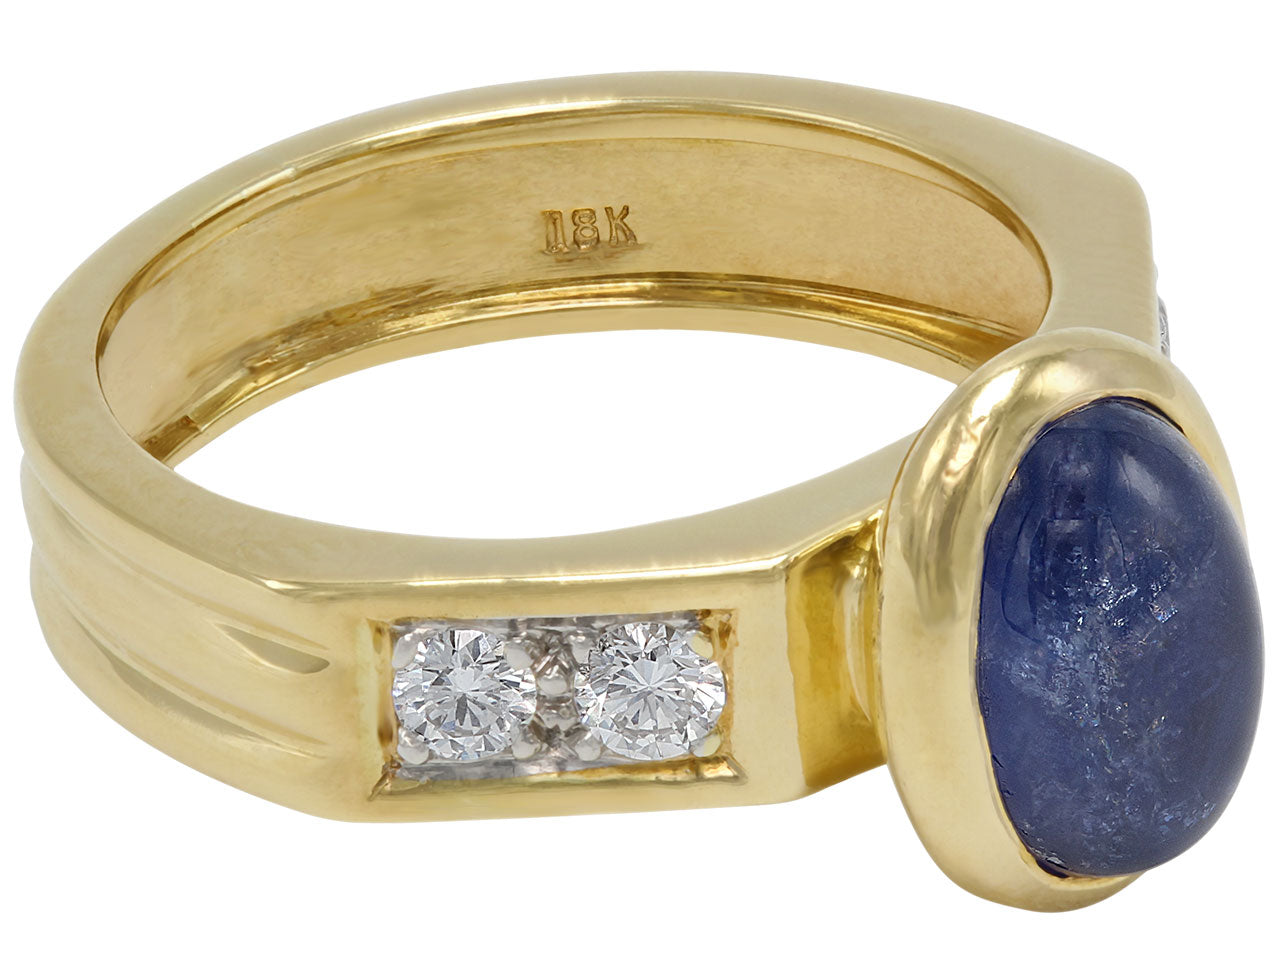 Cabochon Sapphire and Diamond Ring in 18K Gold